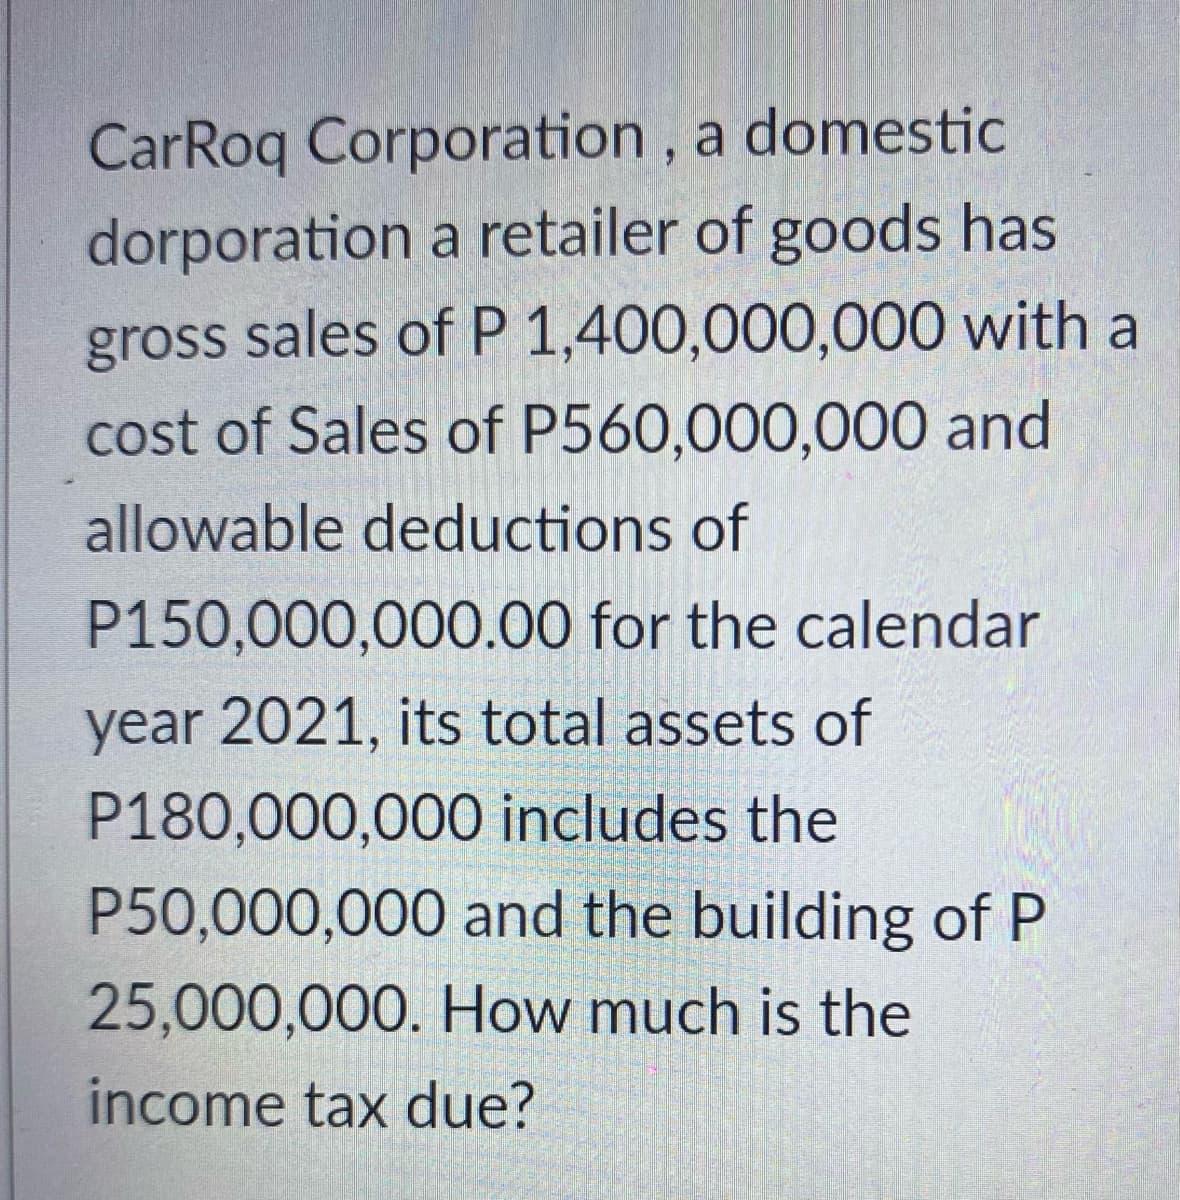 CarRoq Corporation,
a domestic
dorporation
a retailer of goods has
gross sales of P 1,400,000,000 with a
cost of Sales of P560,000,000 and
allowable deductions of
P150,000,000.00 for the calendar
year 2021, its total assets of
P180,000,000 includes the
P50,000,000 and the building of P
25,000,000. How much is the
income tax due?